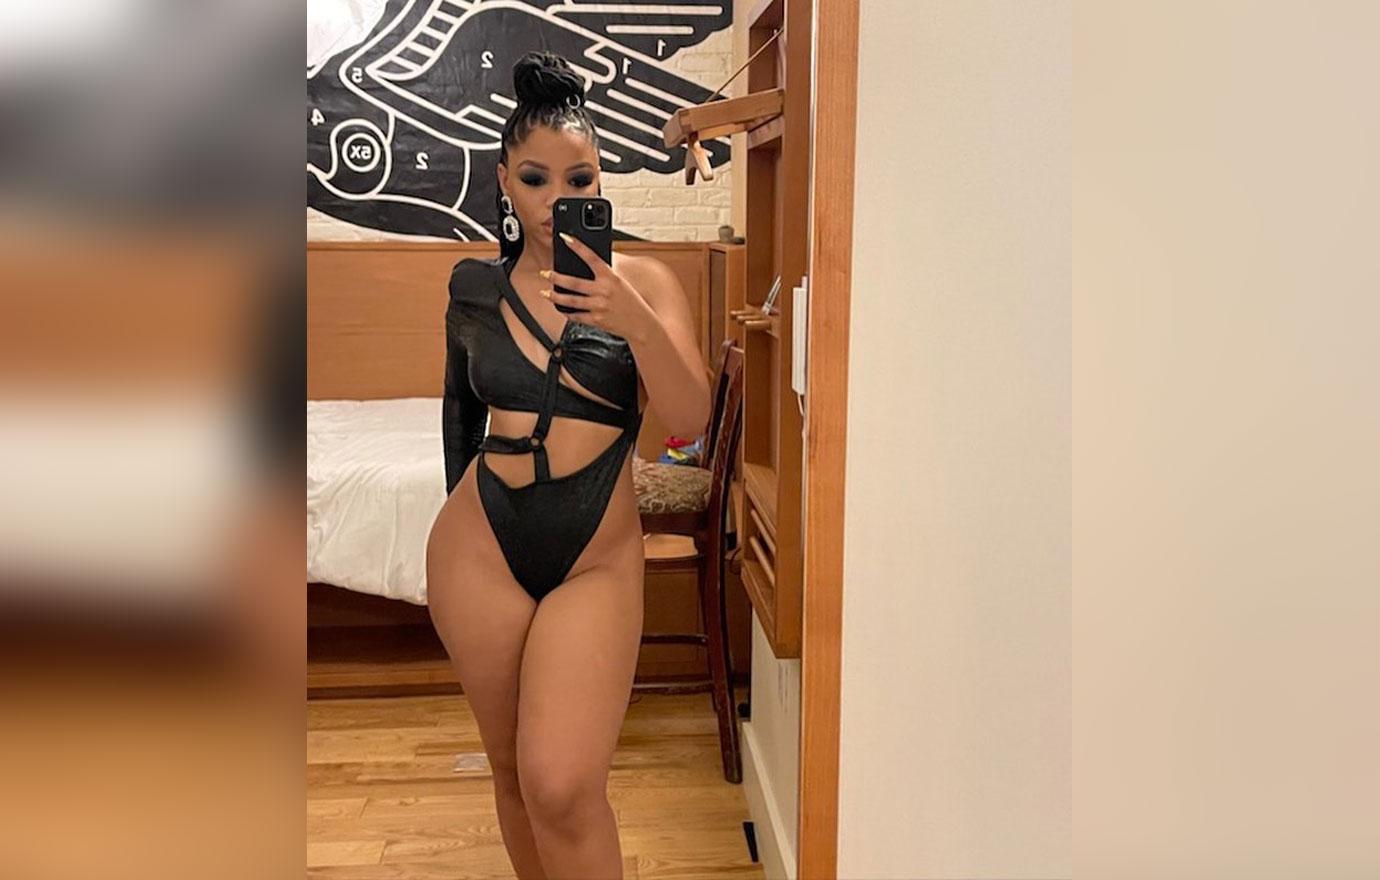 Sexiest Celebrity Thirst Traps Of 2022, See The Hot Photos